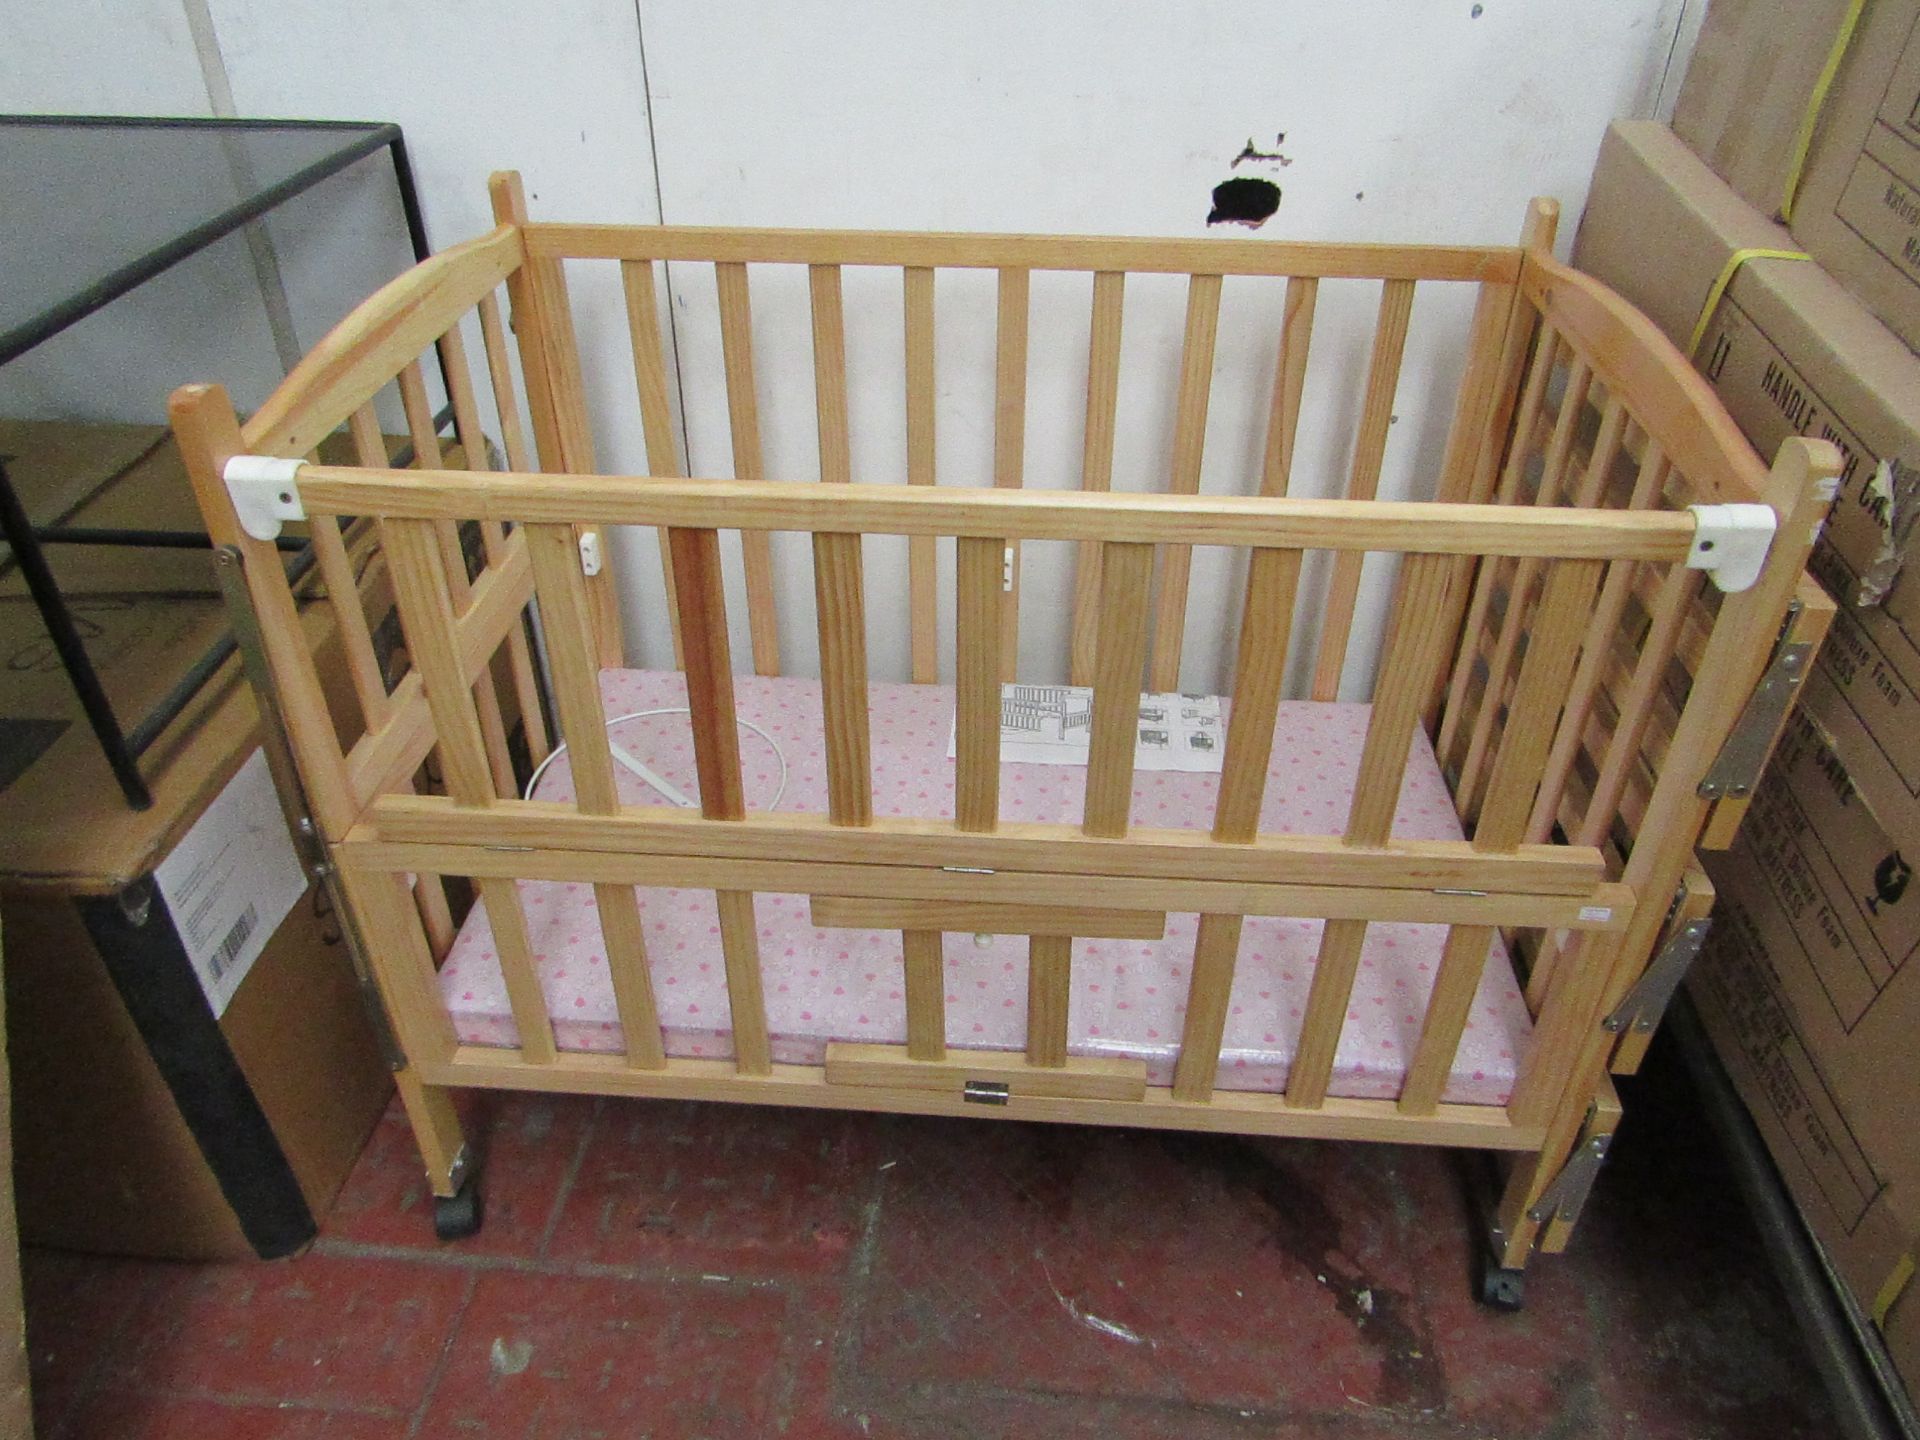 Childs cott with side shelves and Pink mattress, new and boxed.